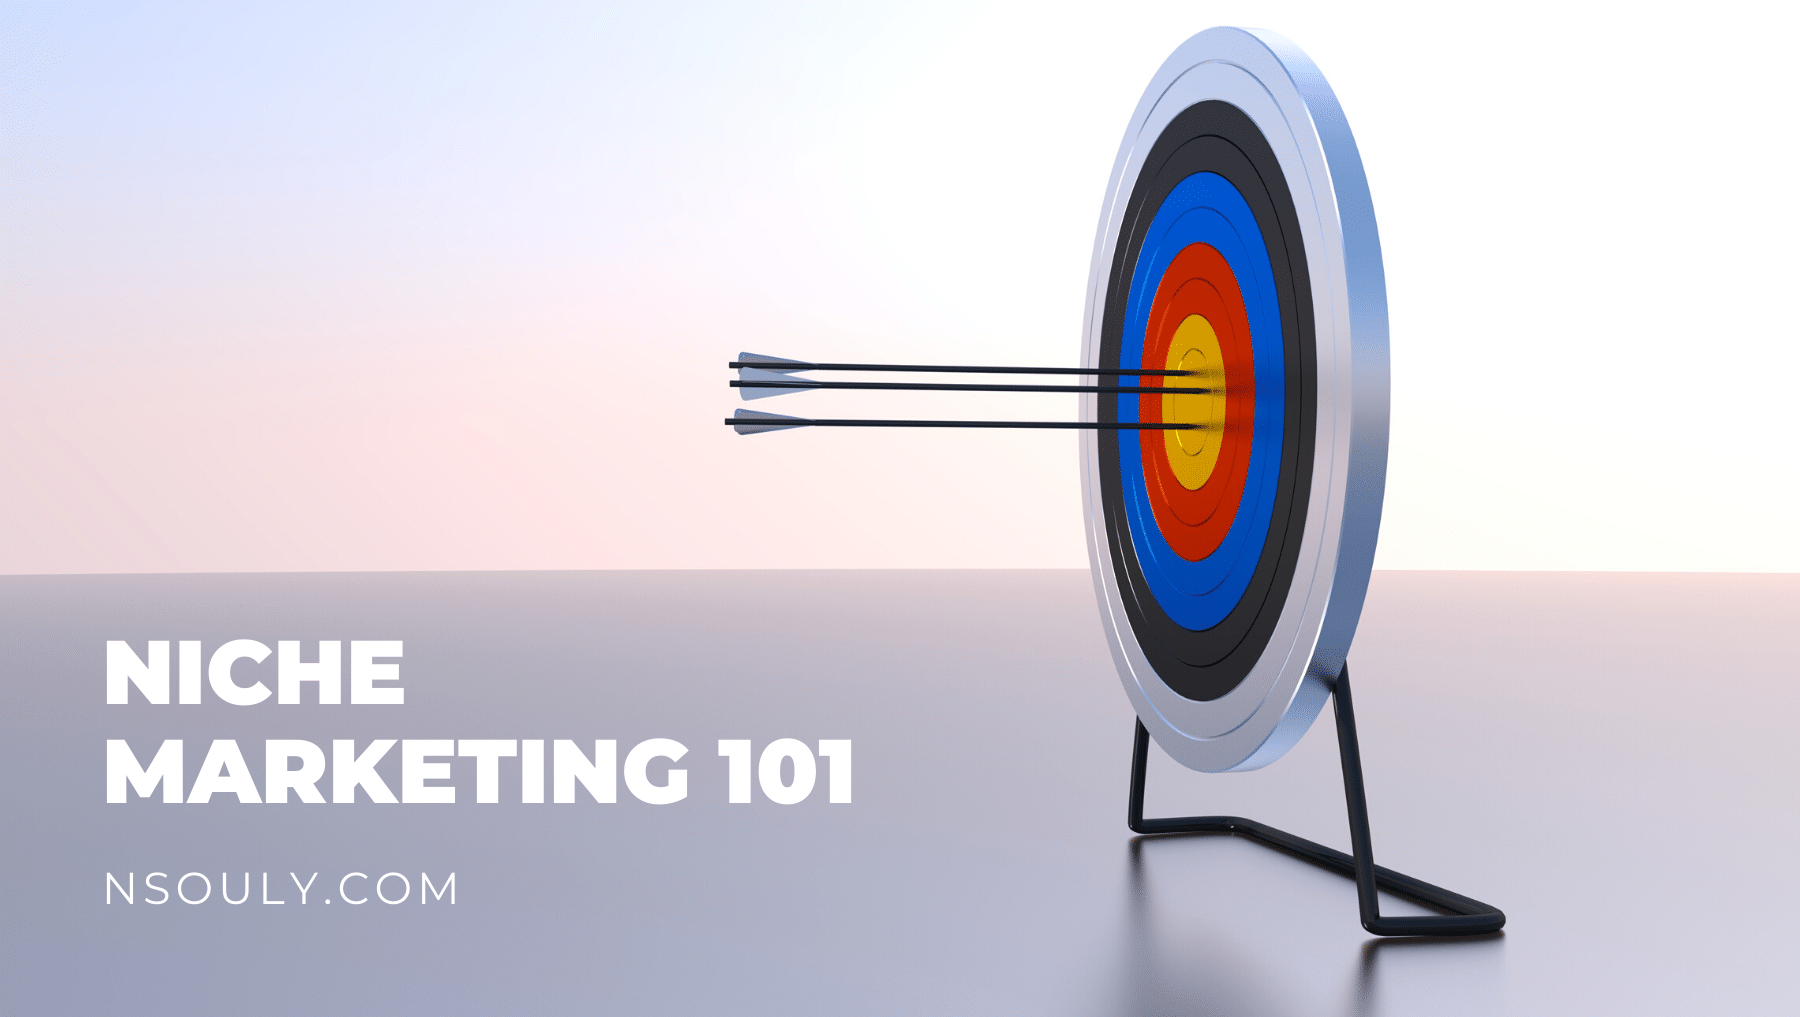 Niche Marketing 101: How To Use It for Your Brand?